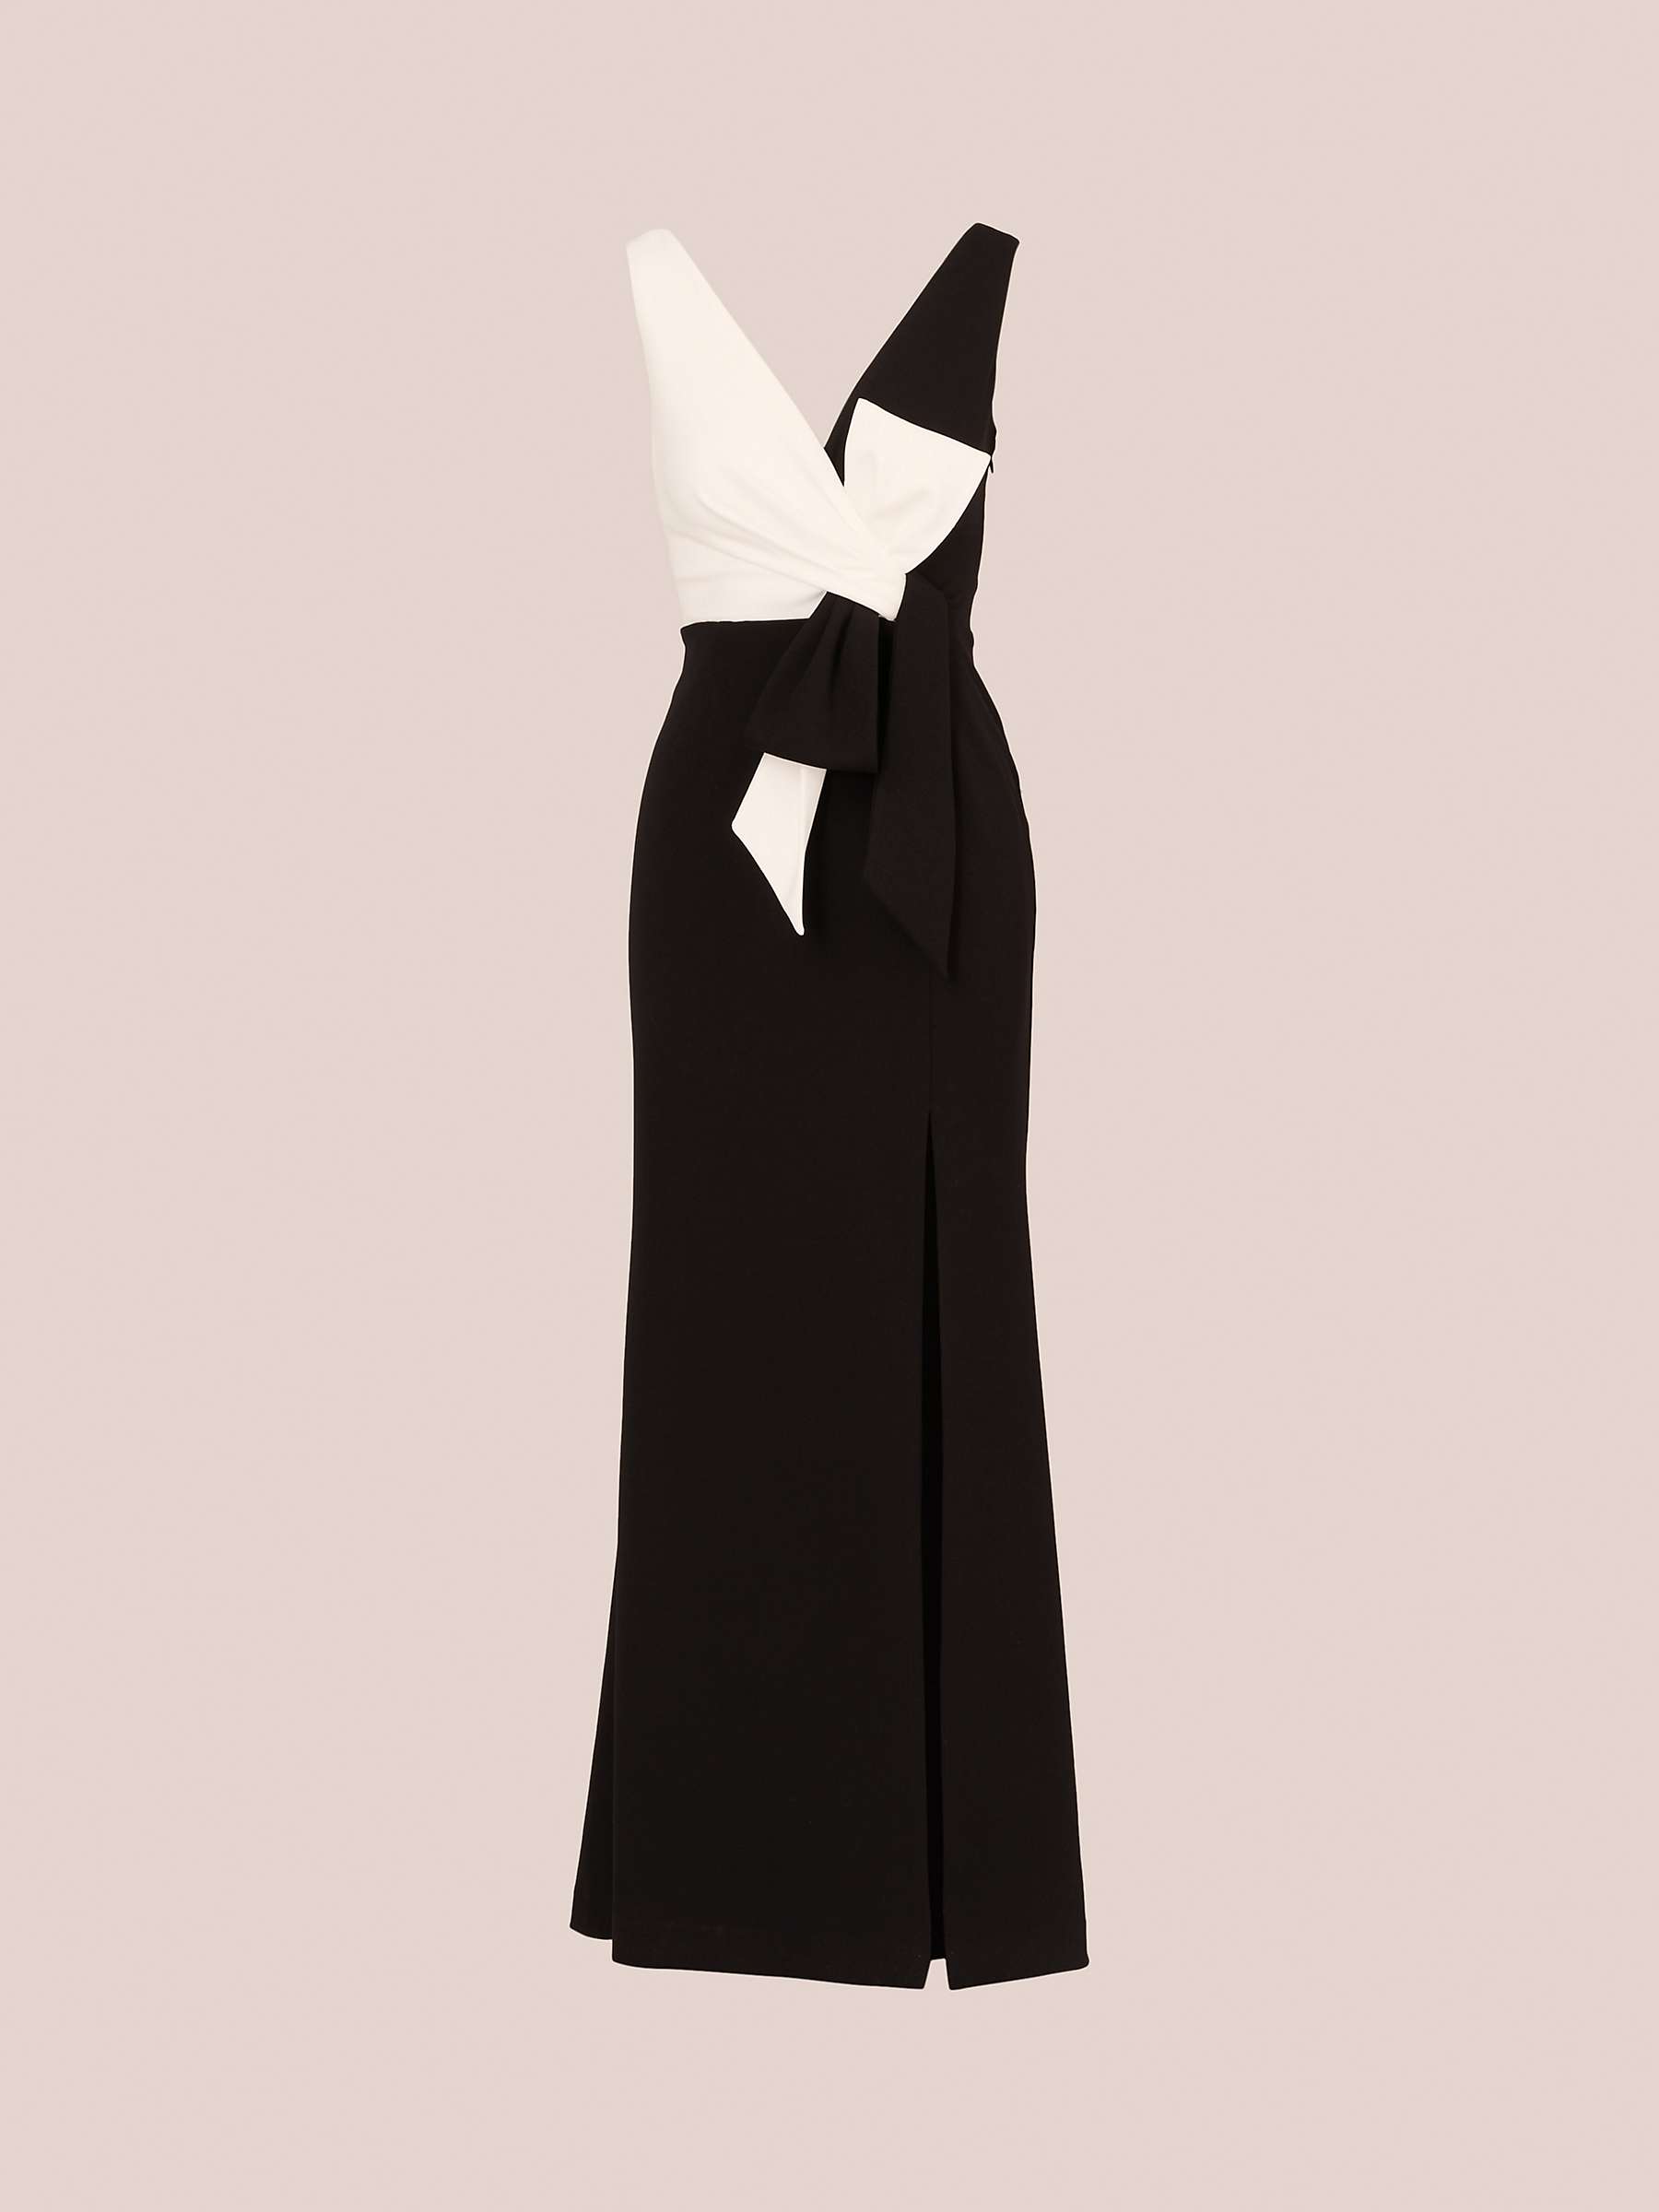 Buy Adrianna Papell Colour Block Maxi Dress, Black/Ivory Online at johnlewis.com